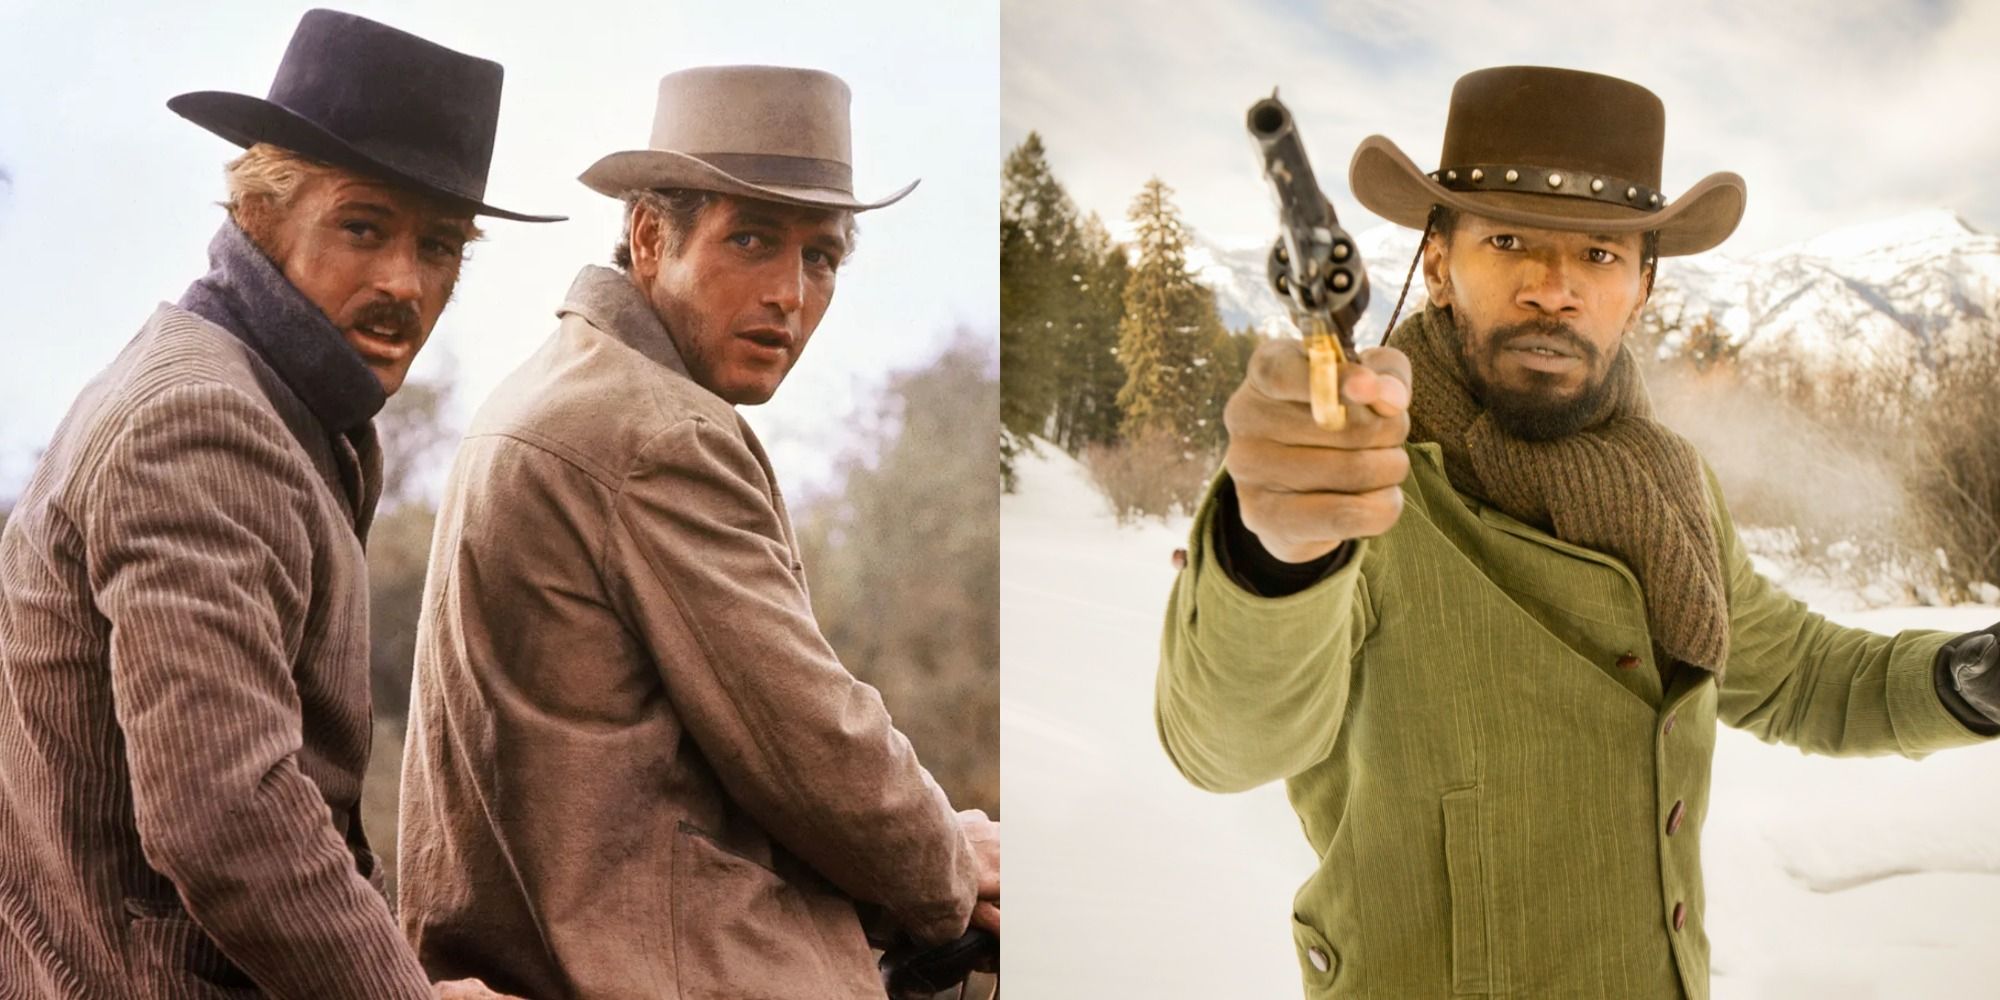 Split image showing Butch Cassidy and the Sundance Kid and Dhango in Django Unchained.